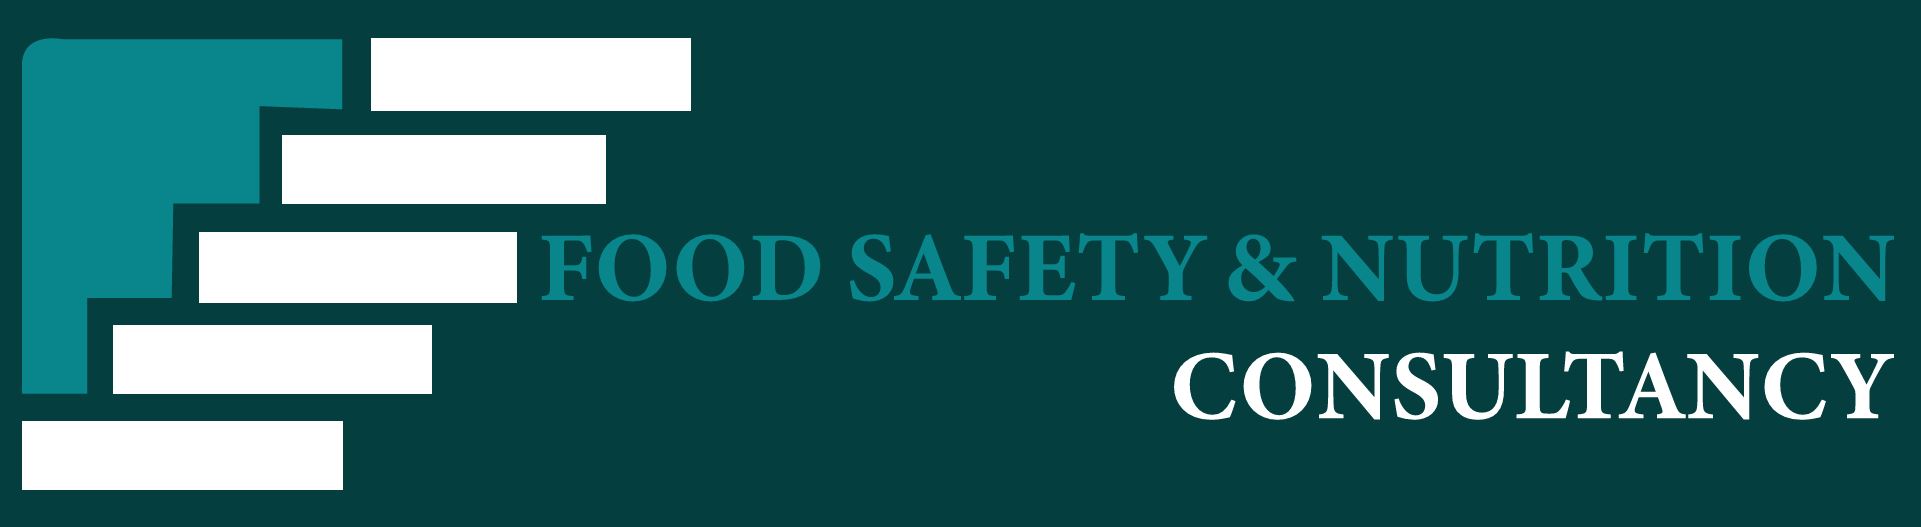 FOOD SAFETY & NUTRITION CONSULTANCY